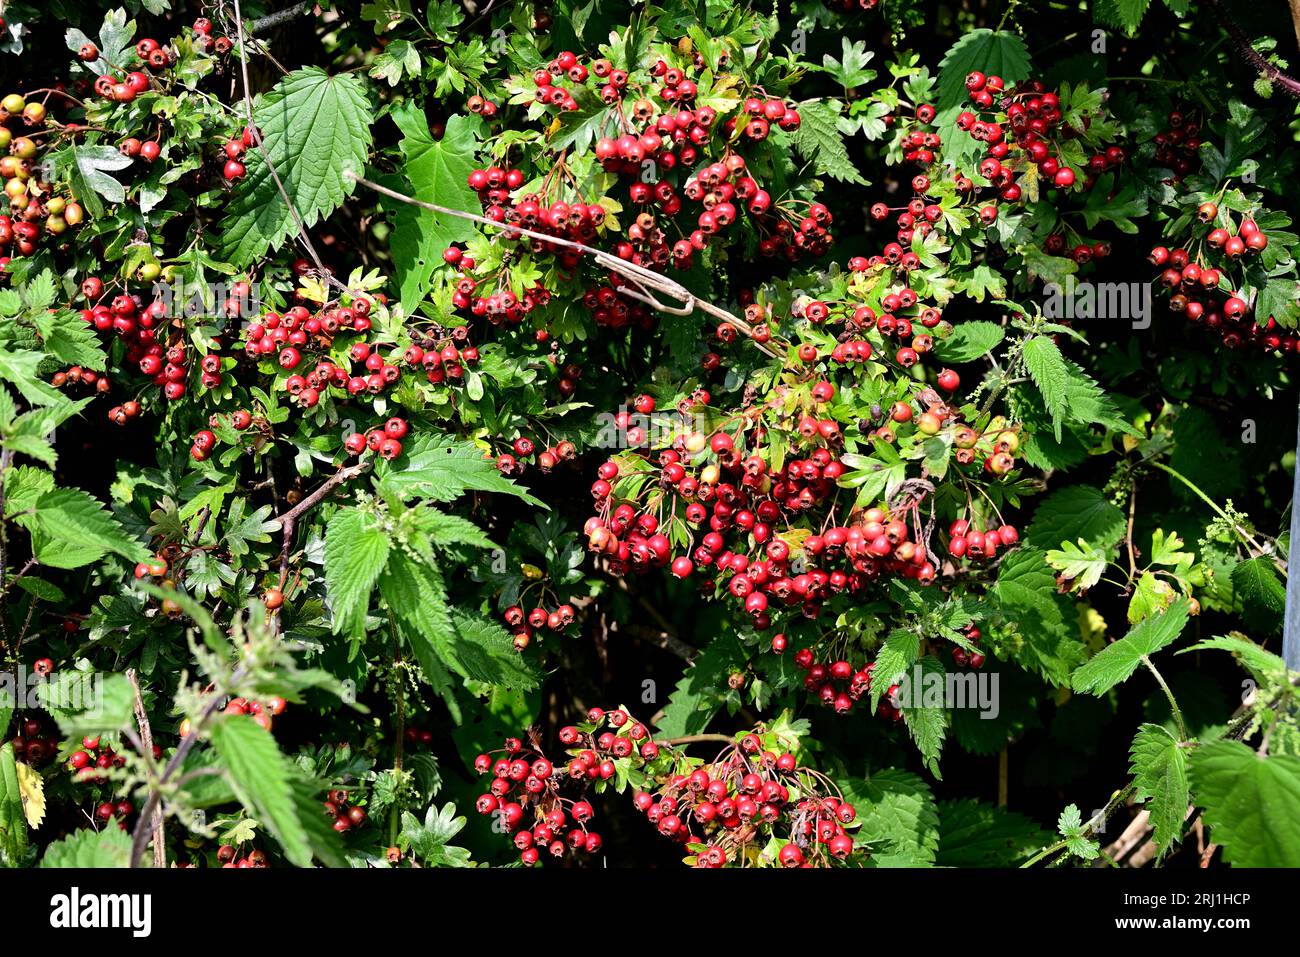 Around the UK - Hawthorn berries in a Lancashire hedgerow Stock Photo